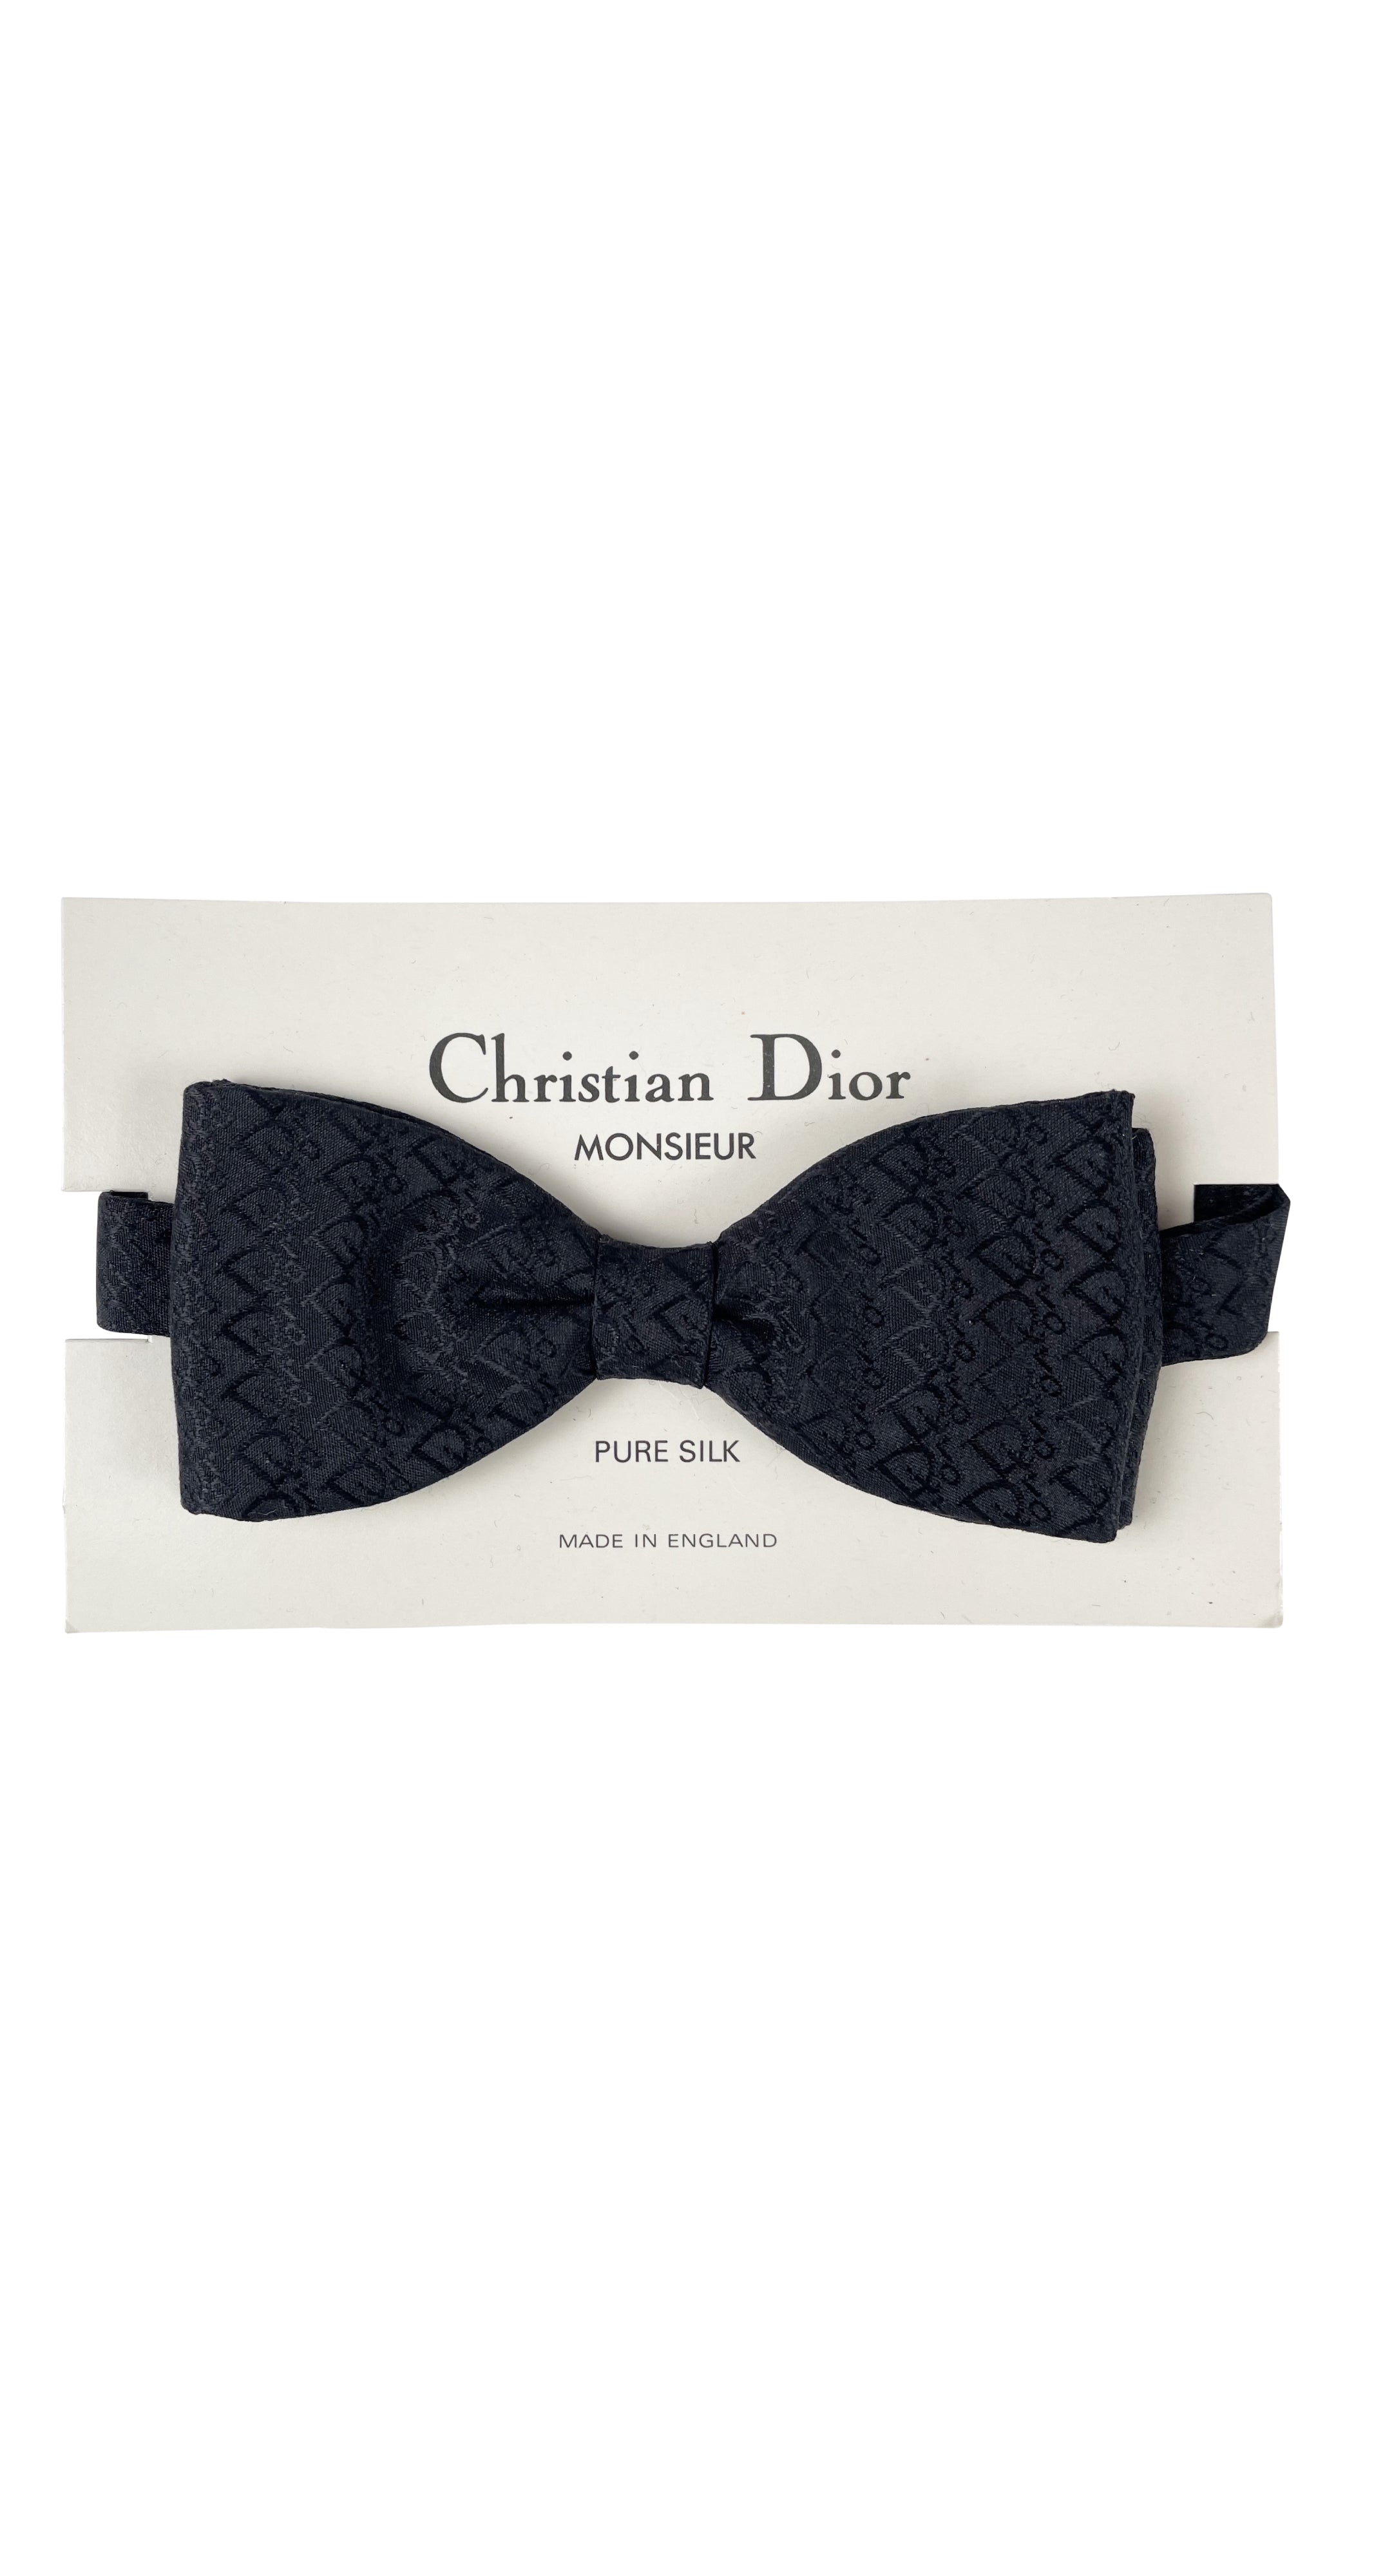 Dior, Accessories, Christian Dior Black Bow Tie Made In Italy